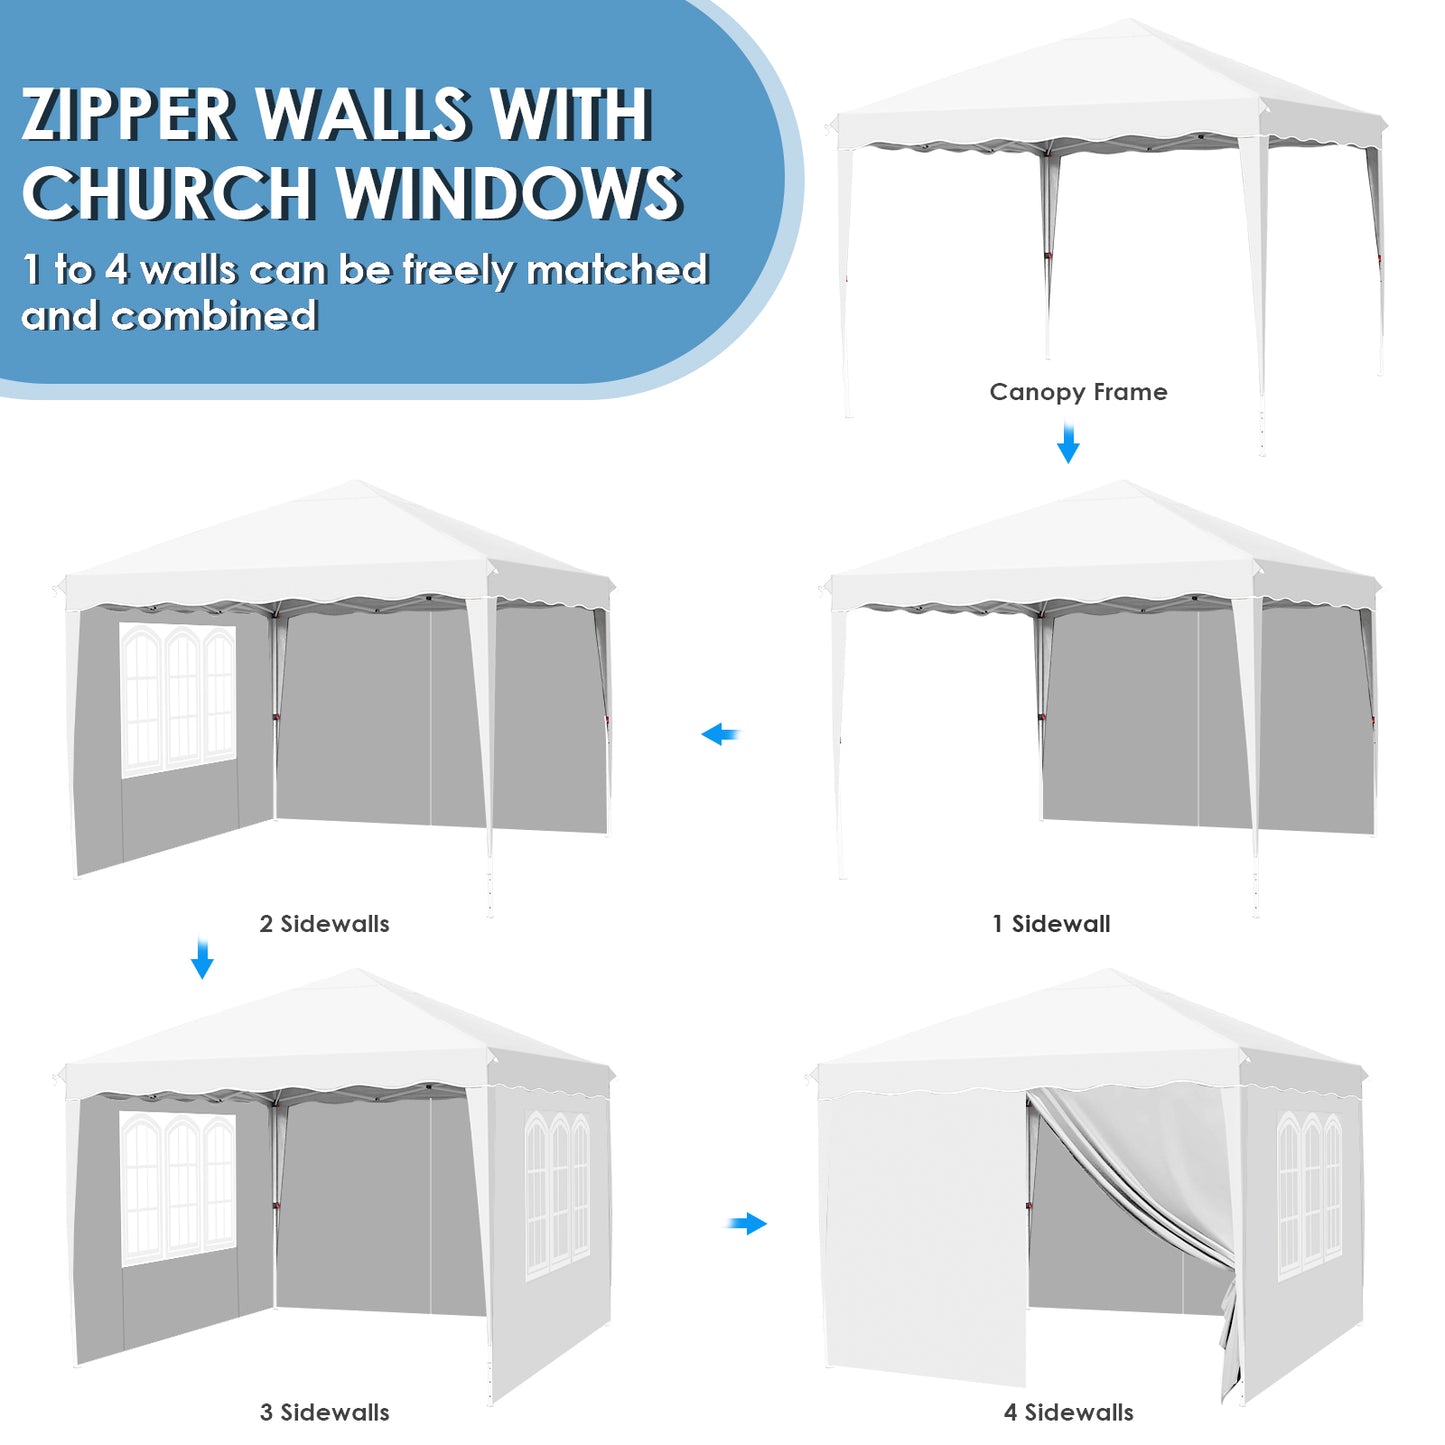 Arlopu 10x10 Pop Up Commercial Canopy Tent, Fully Waterproof Instant Gazebo Tent with 4 Removable Sidewall, Heavy Duty Outdoor Party Events Camping Beach Canopies, Upgraded Removable Wheel Bag, White